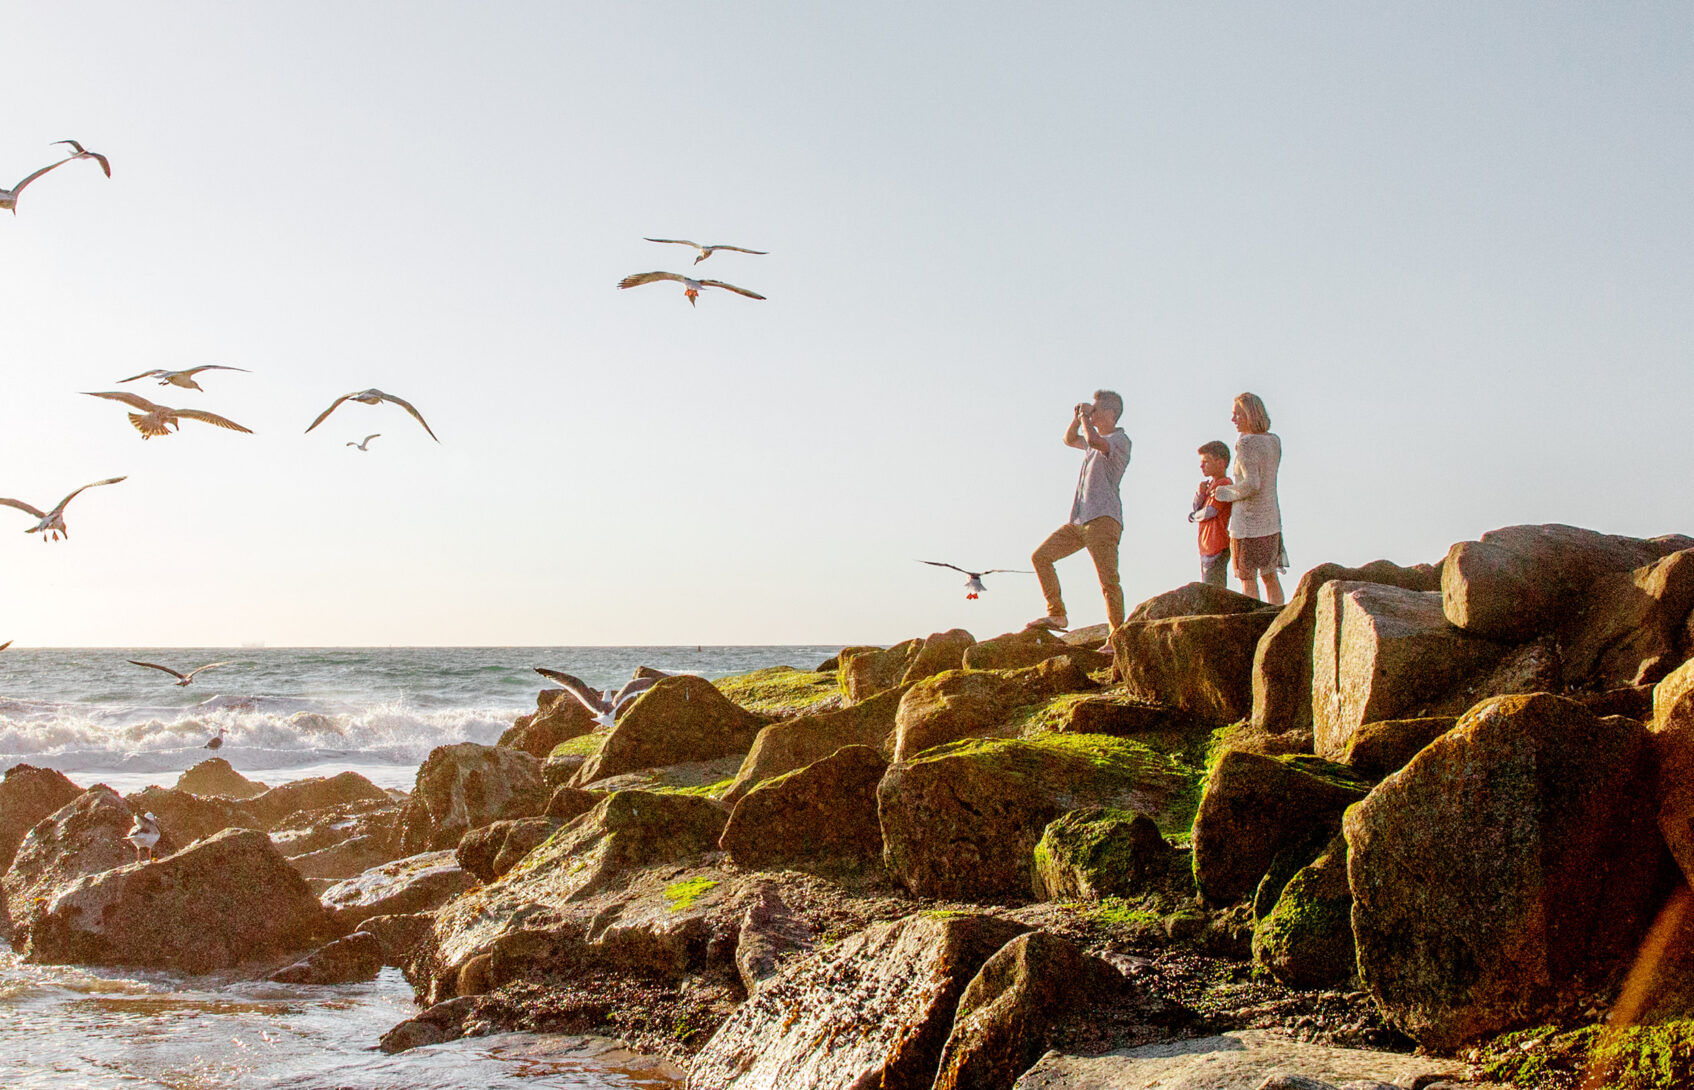 A man, woman, and child standing on rocks near the water’s edge looking at seagulls flying by